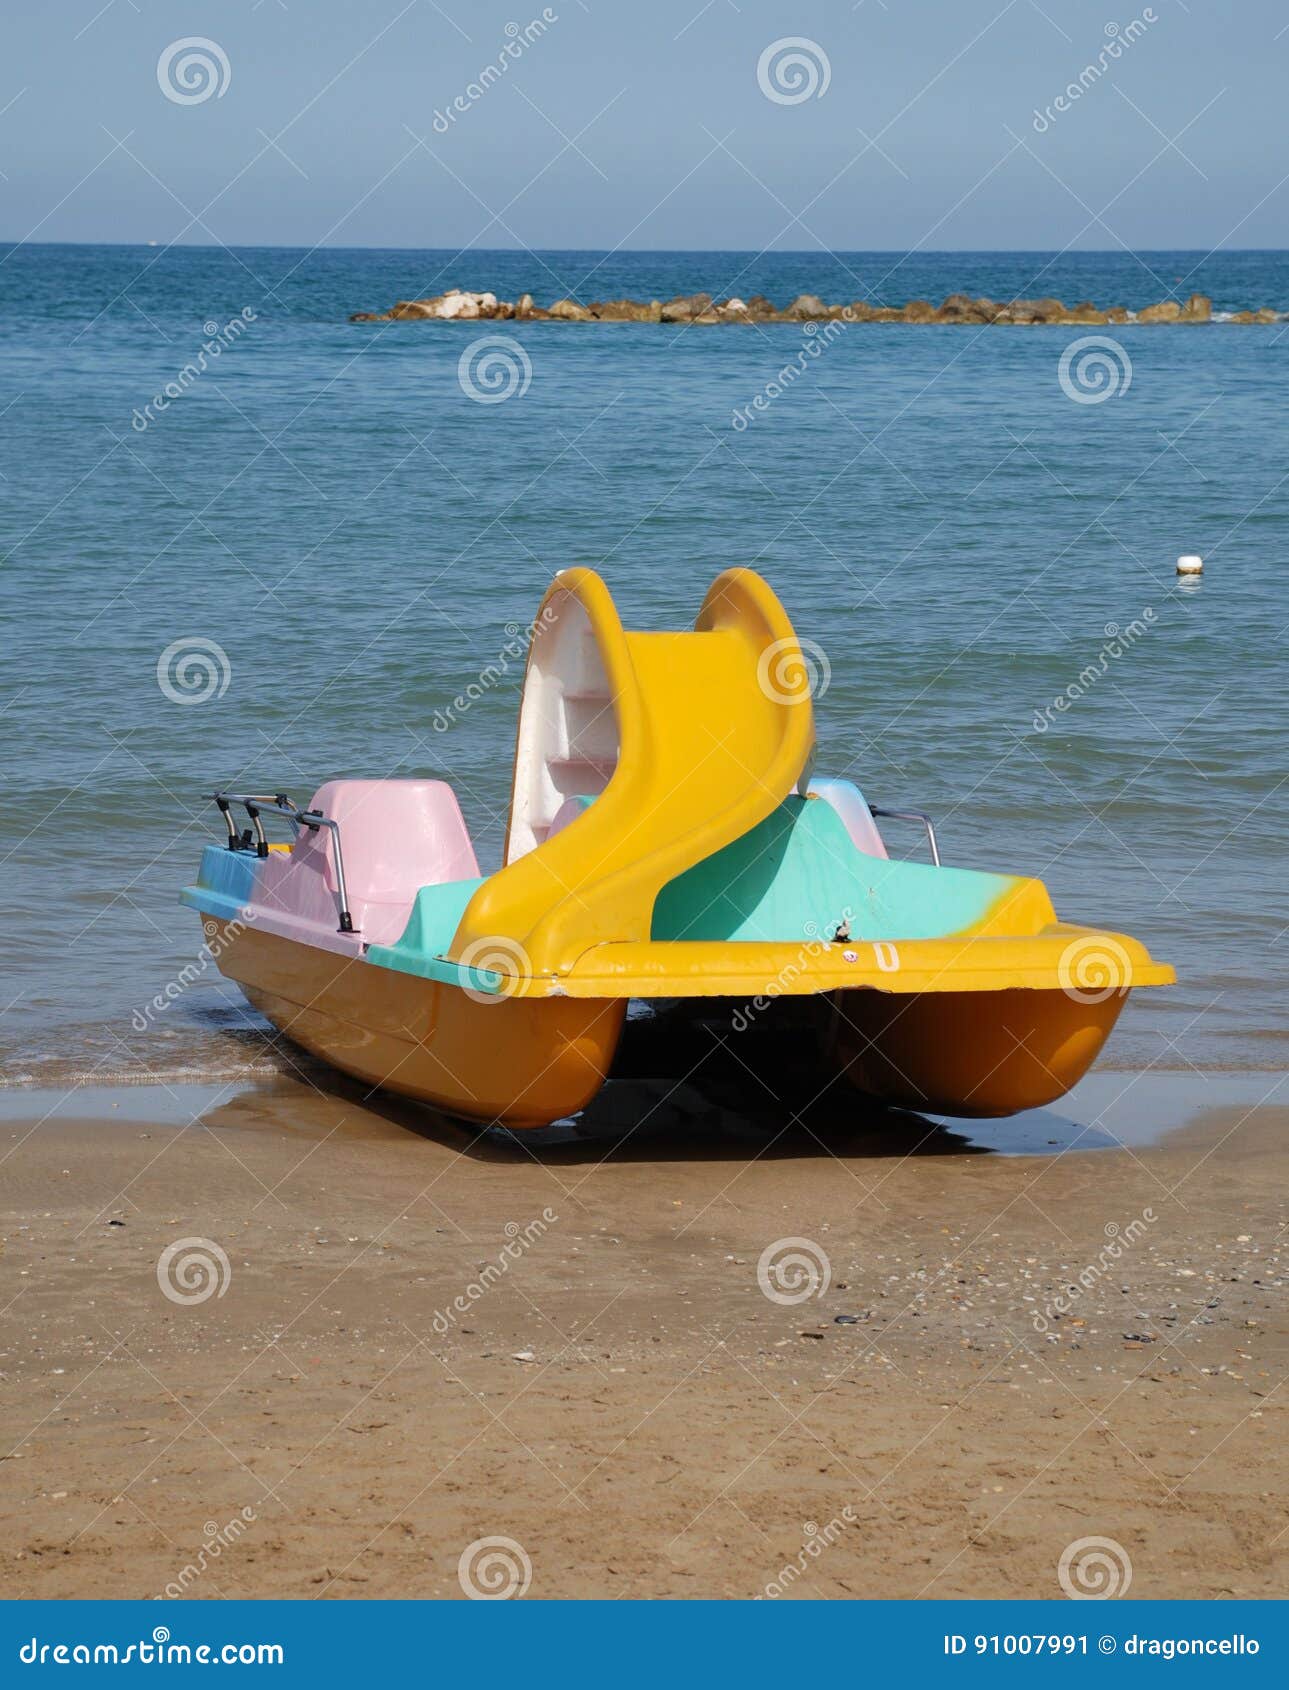 https://thumbs.dreamstime.com/z/pedalo-slide-brightly-coloured-italian-beach-includes-water-91007991.jpg